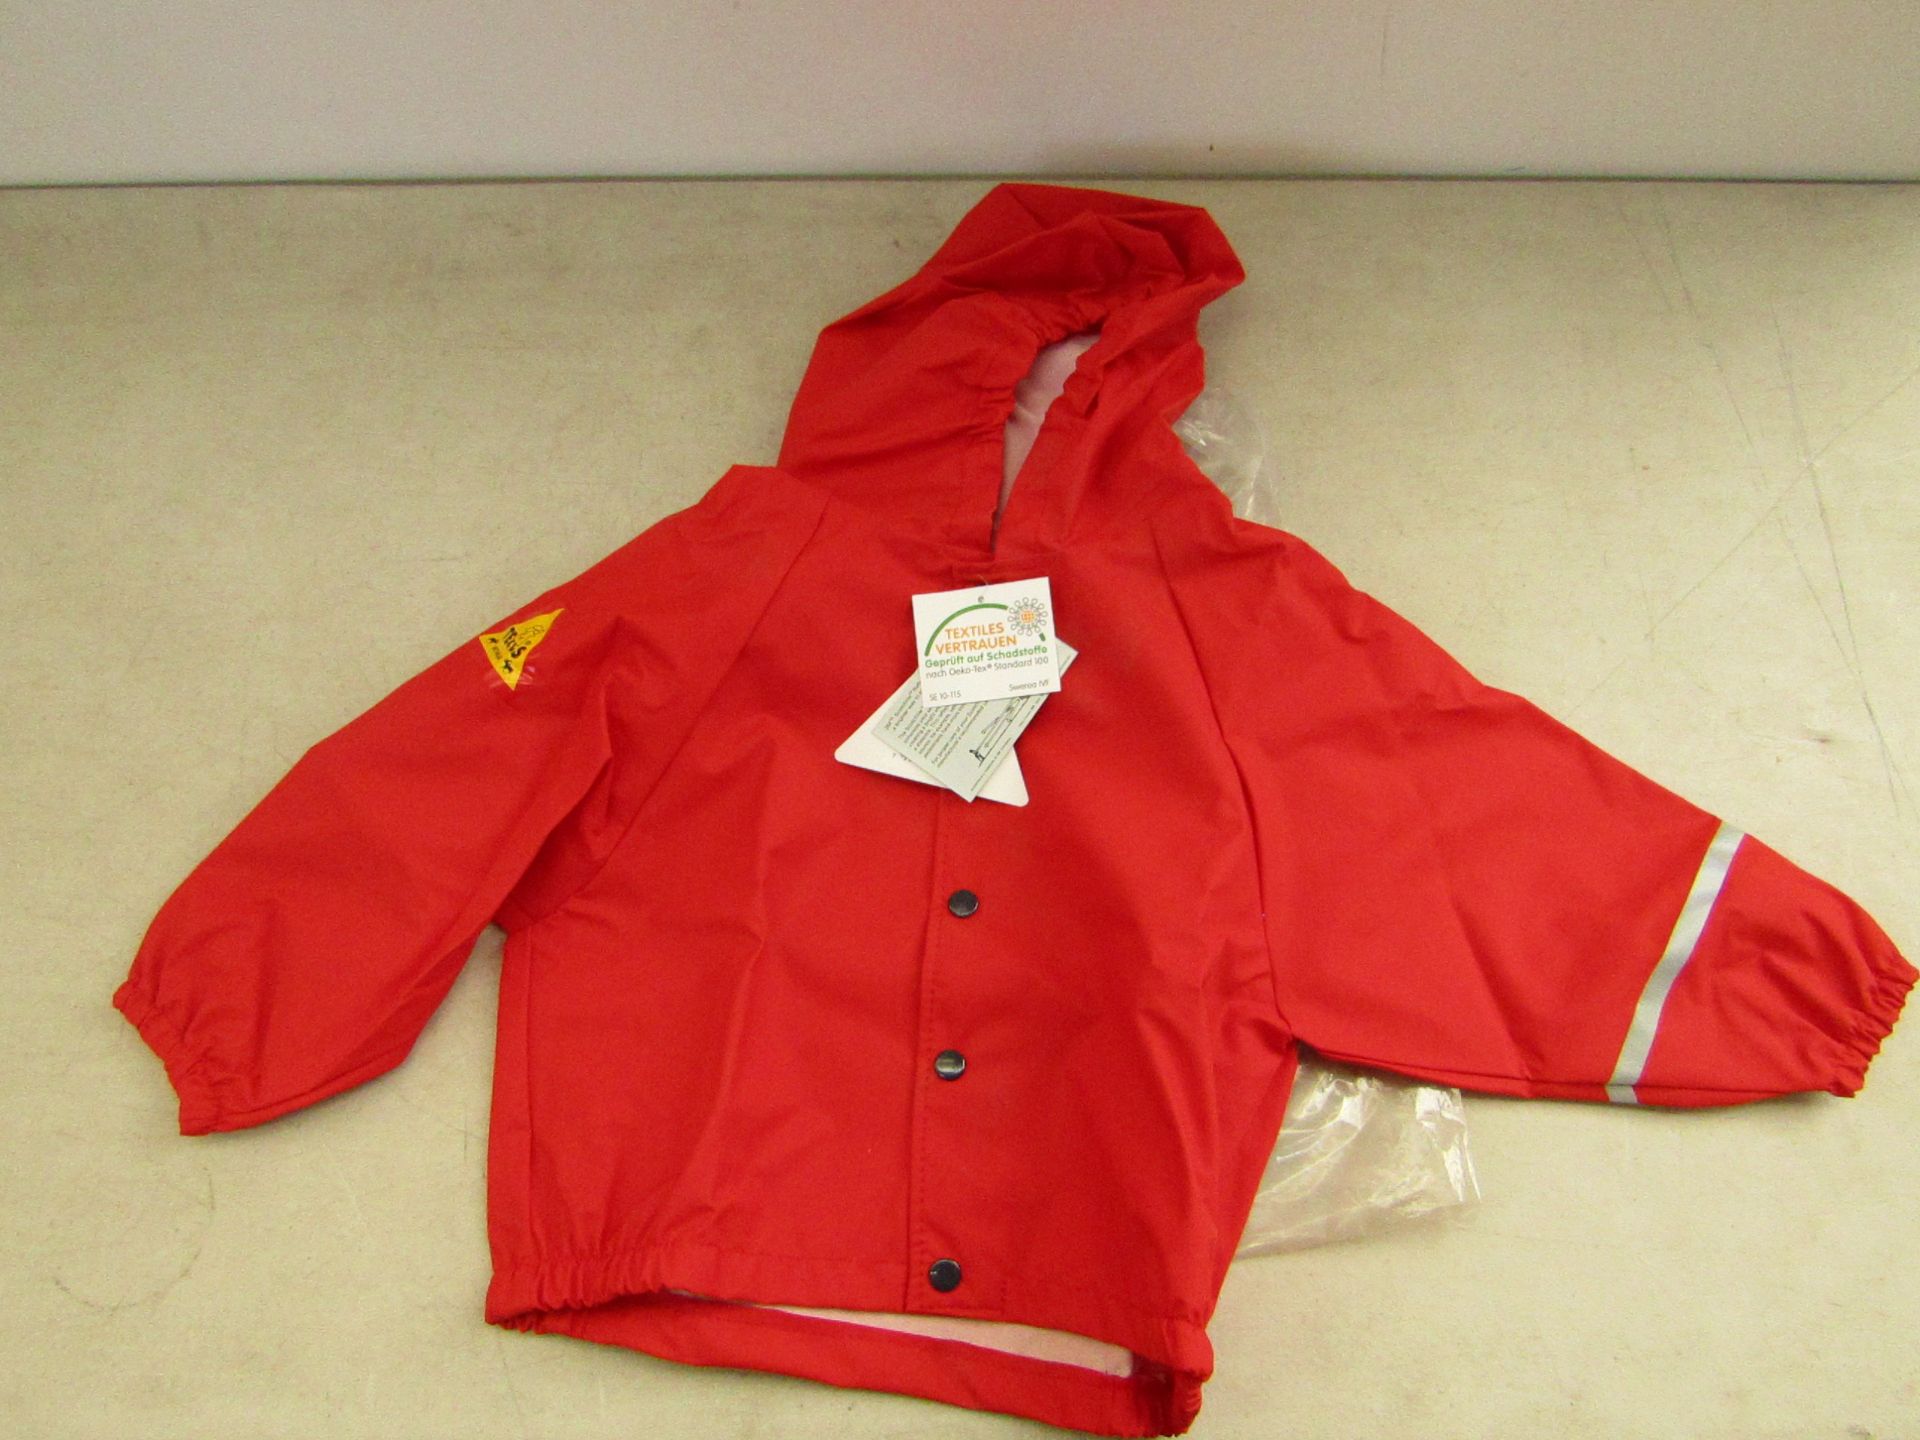 3x Raindrops Jacket 2-3 Years/Red, all new and packaged.    Total RRP £60      Sku Code - 163067